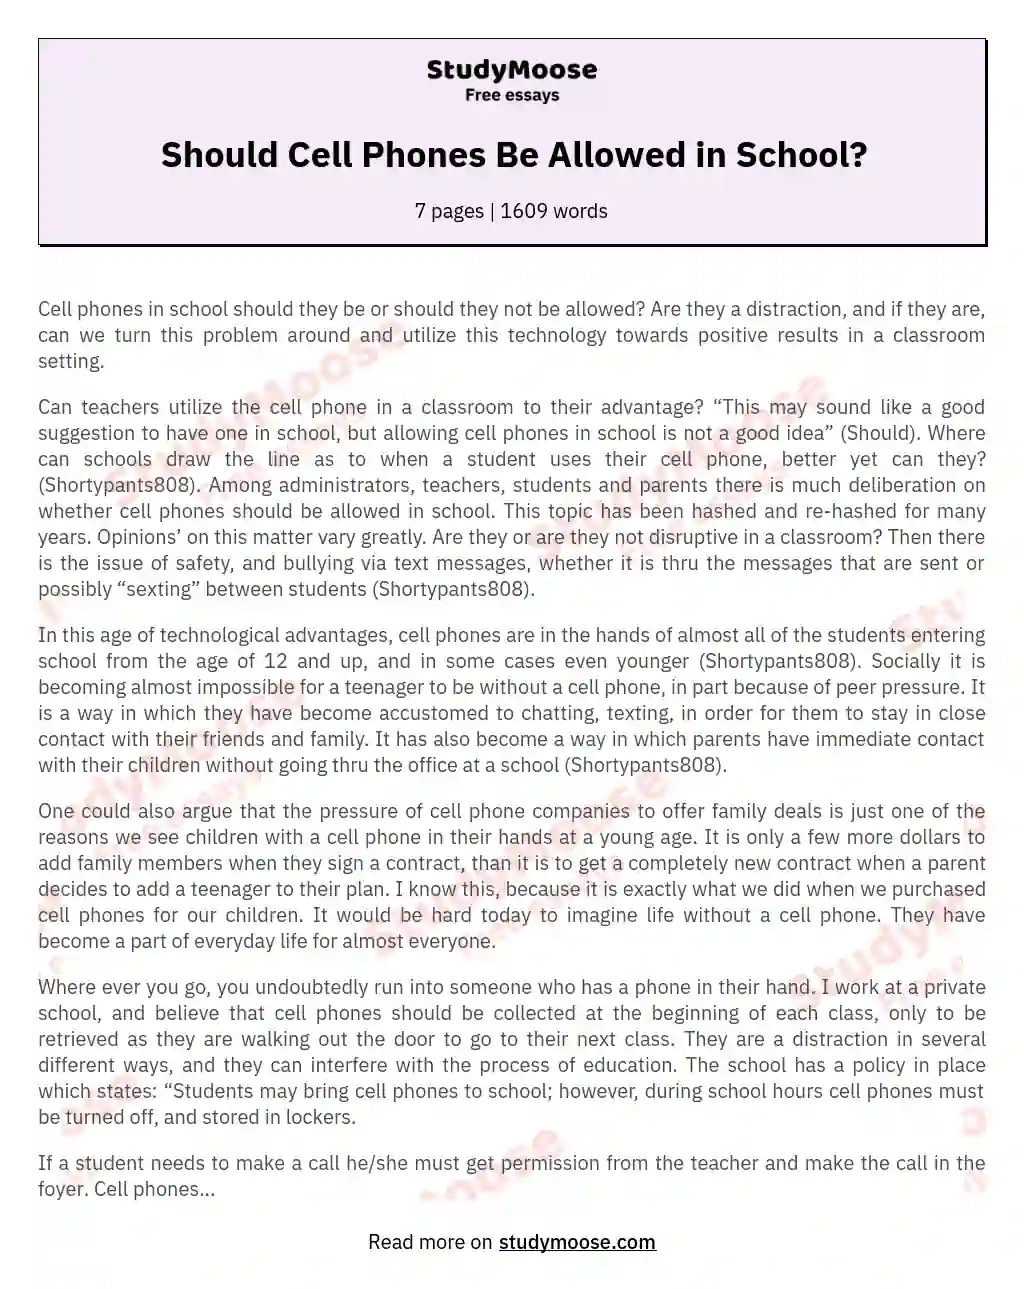 Should Cell Phones Be Allowed in School?